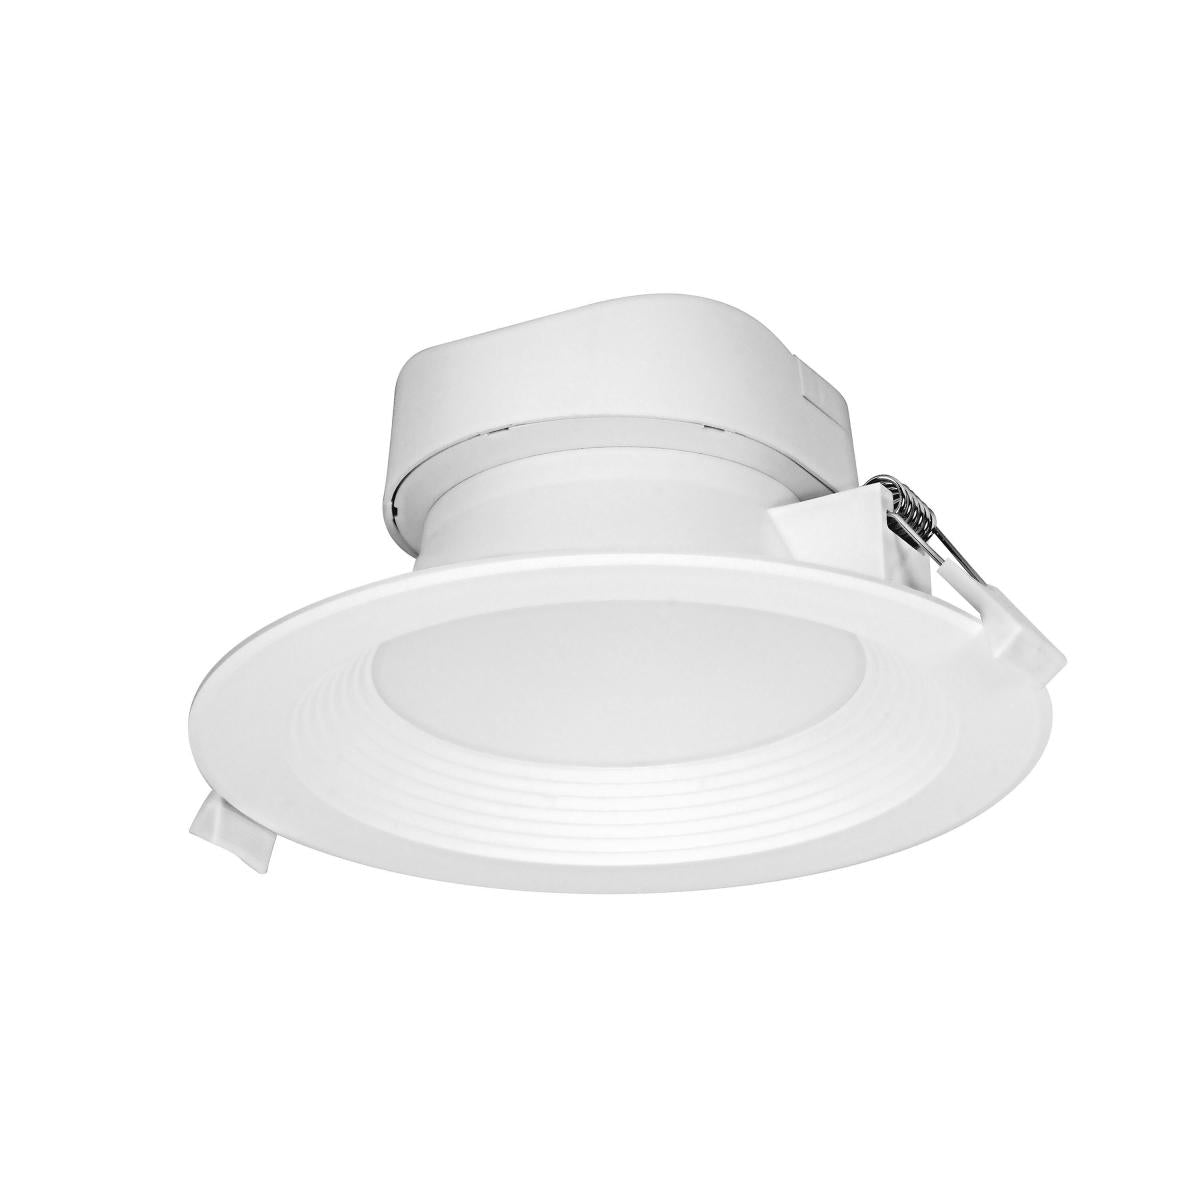 Satco S39028 9 watt LED Direct Wire Downlight 5-6 inch 4000K 120 volt Dimmable